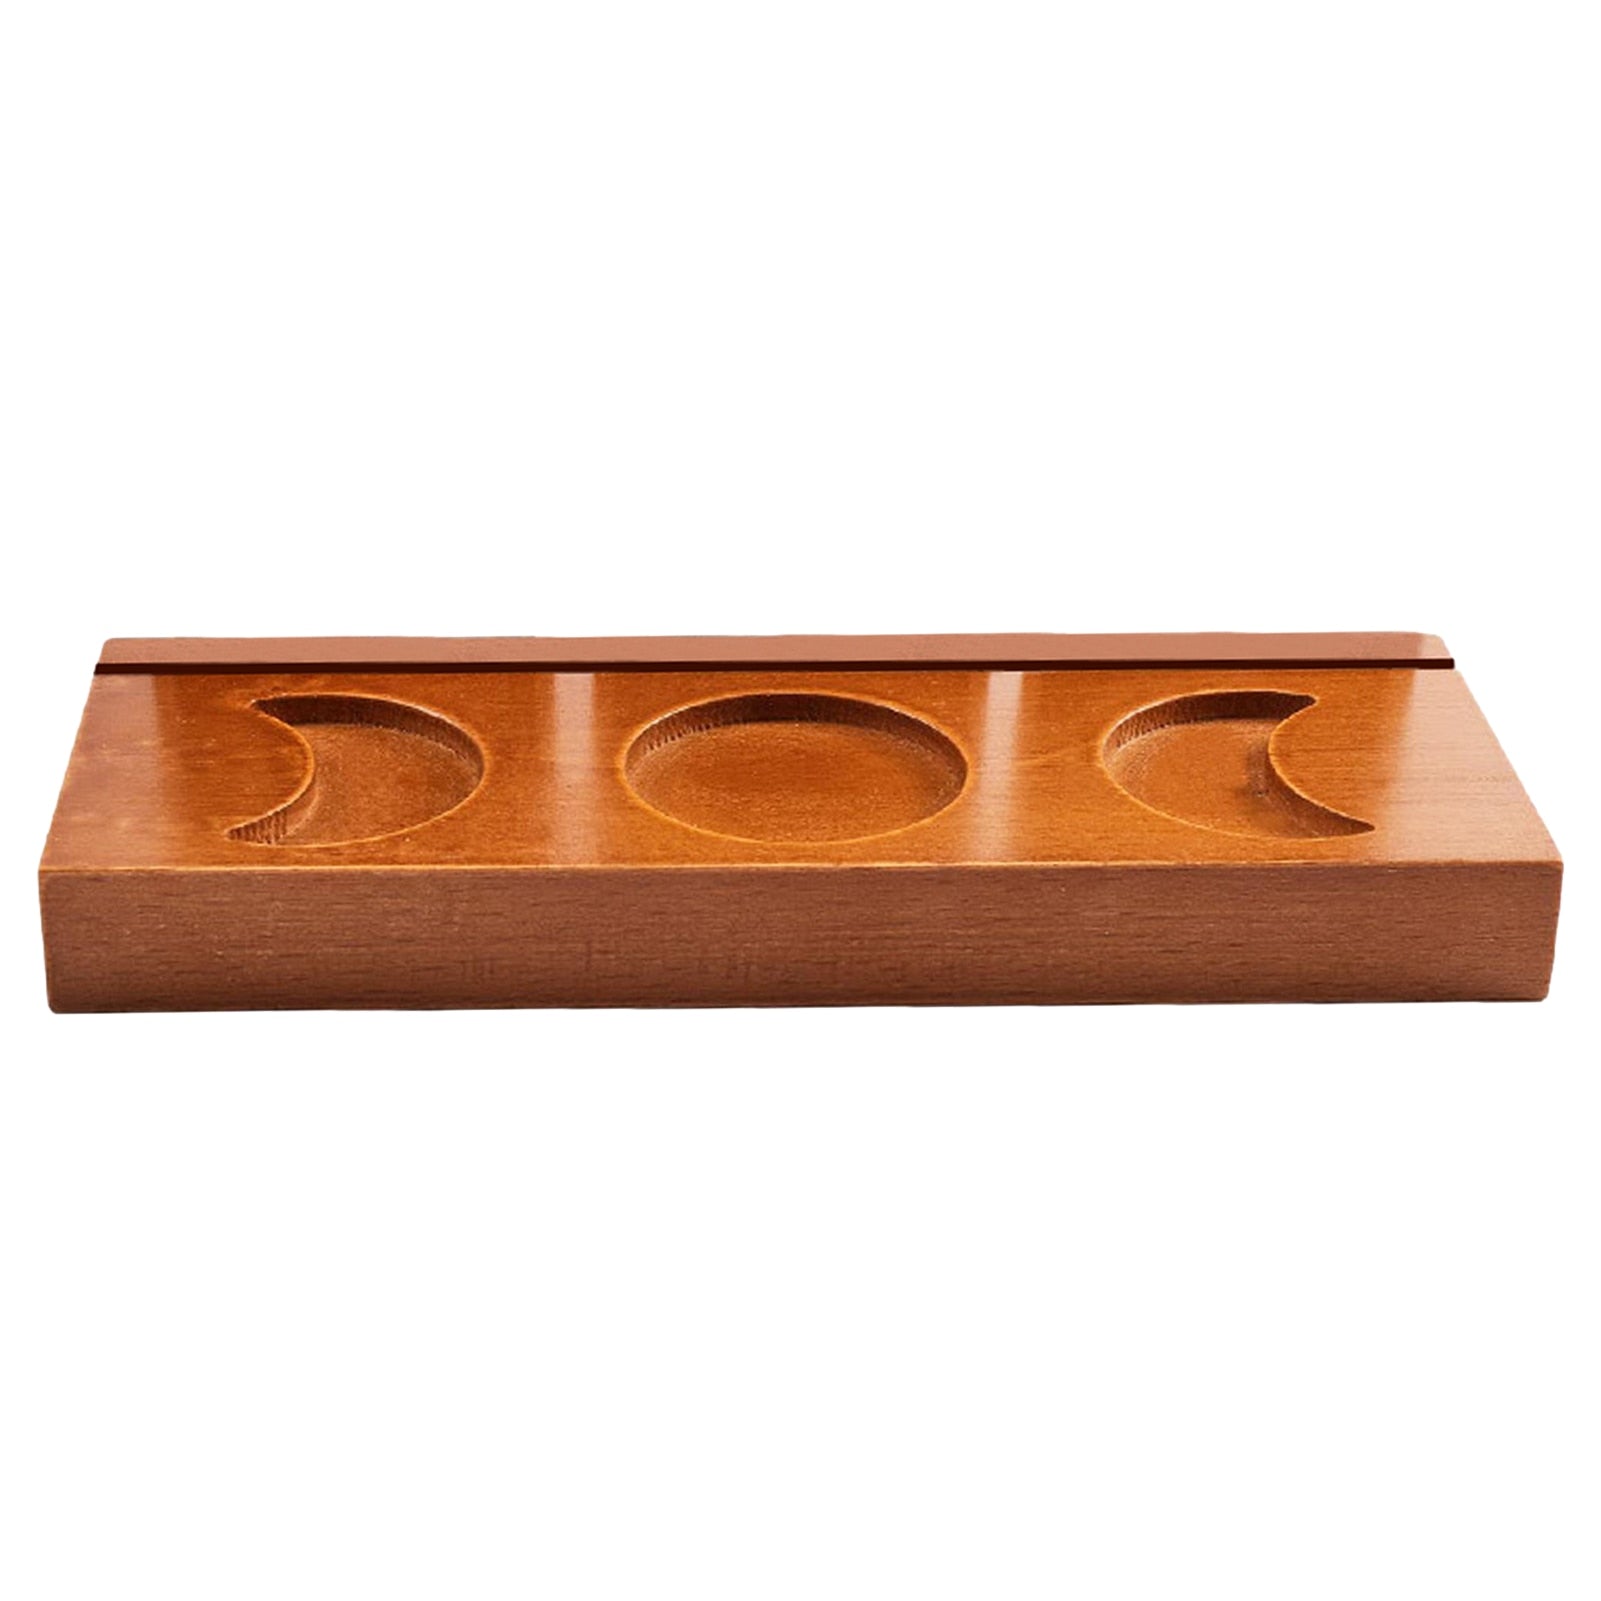 Wood Tarot Card Holder Stand Display Your Daily Affirmations